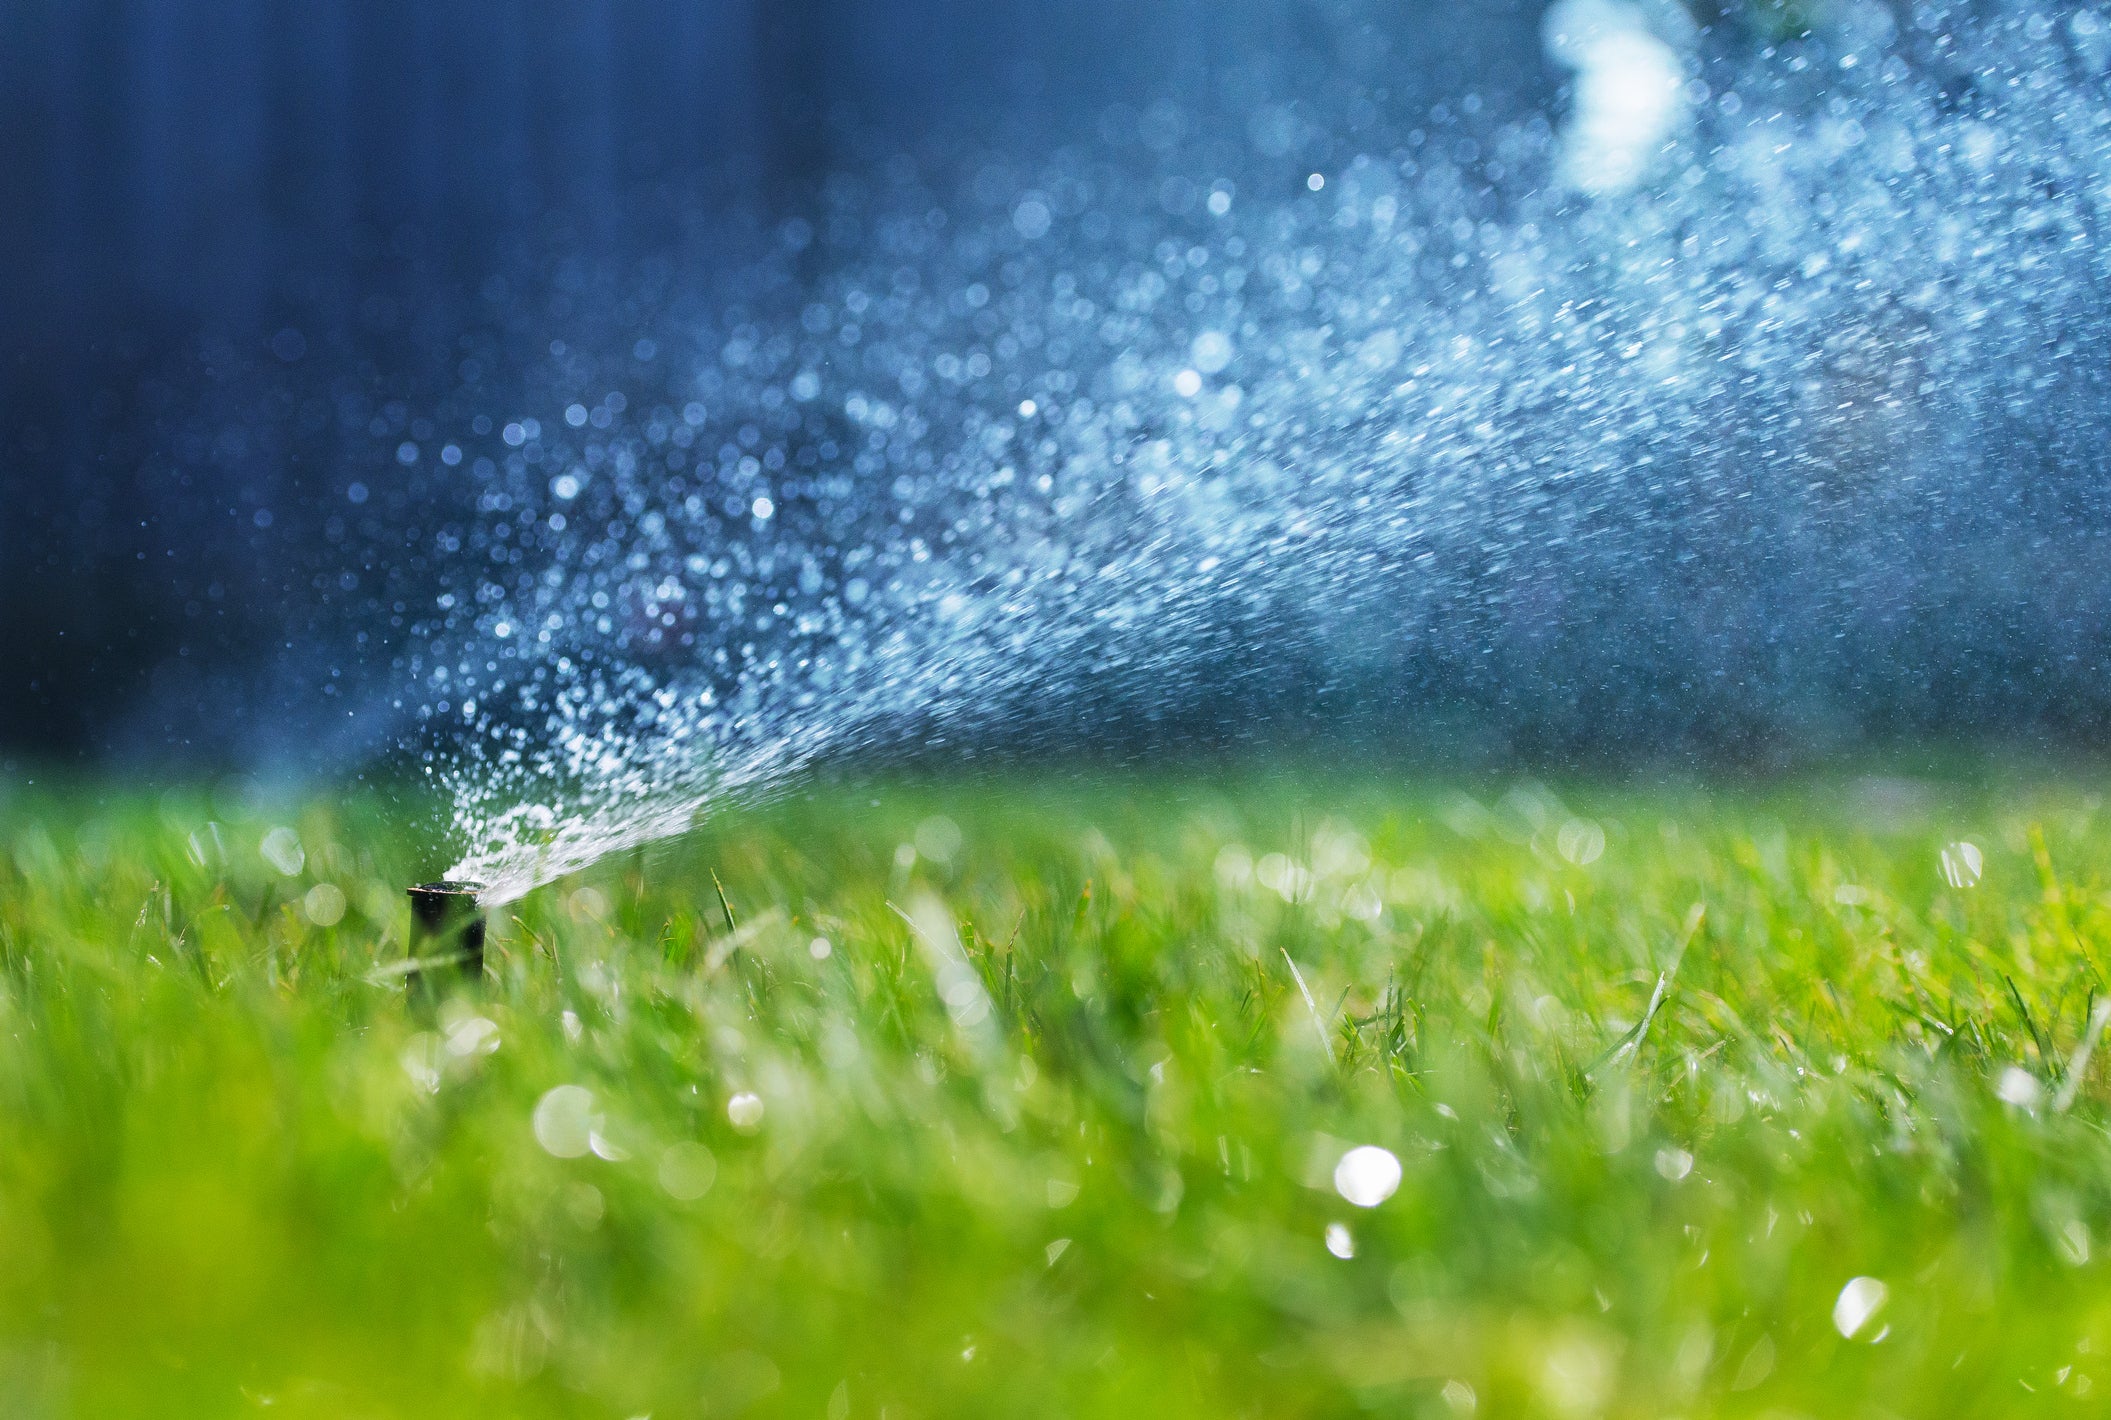 How to Check Your Sprinkler Run Time and Save Water